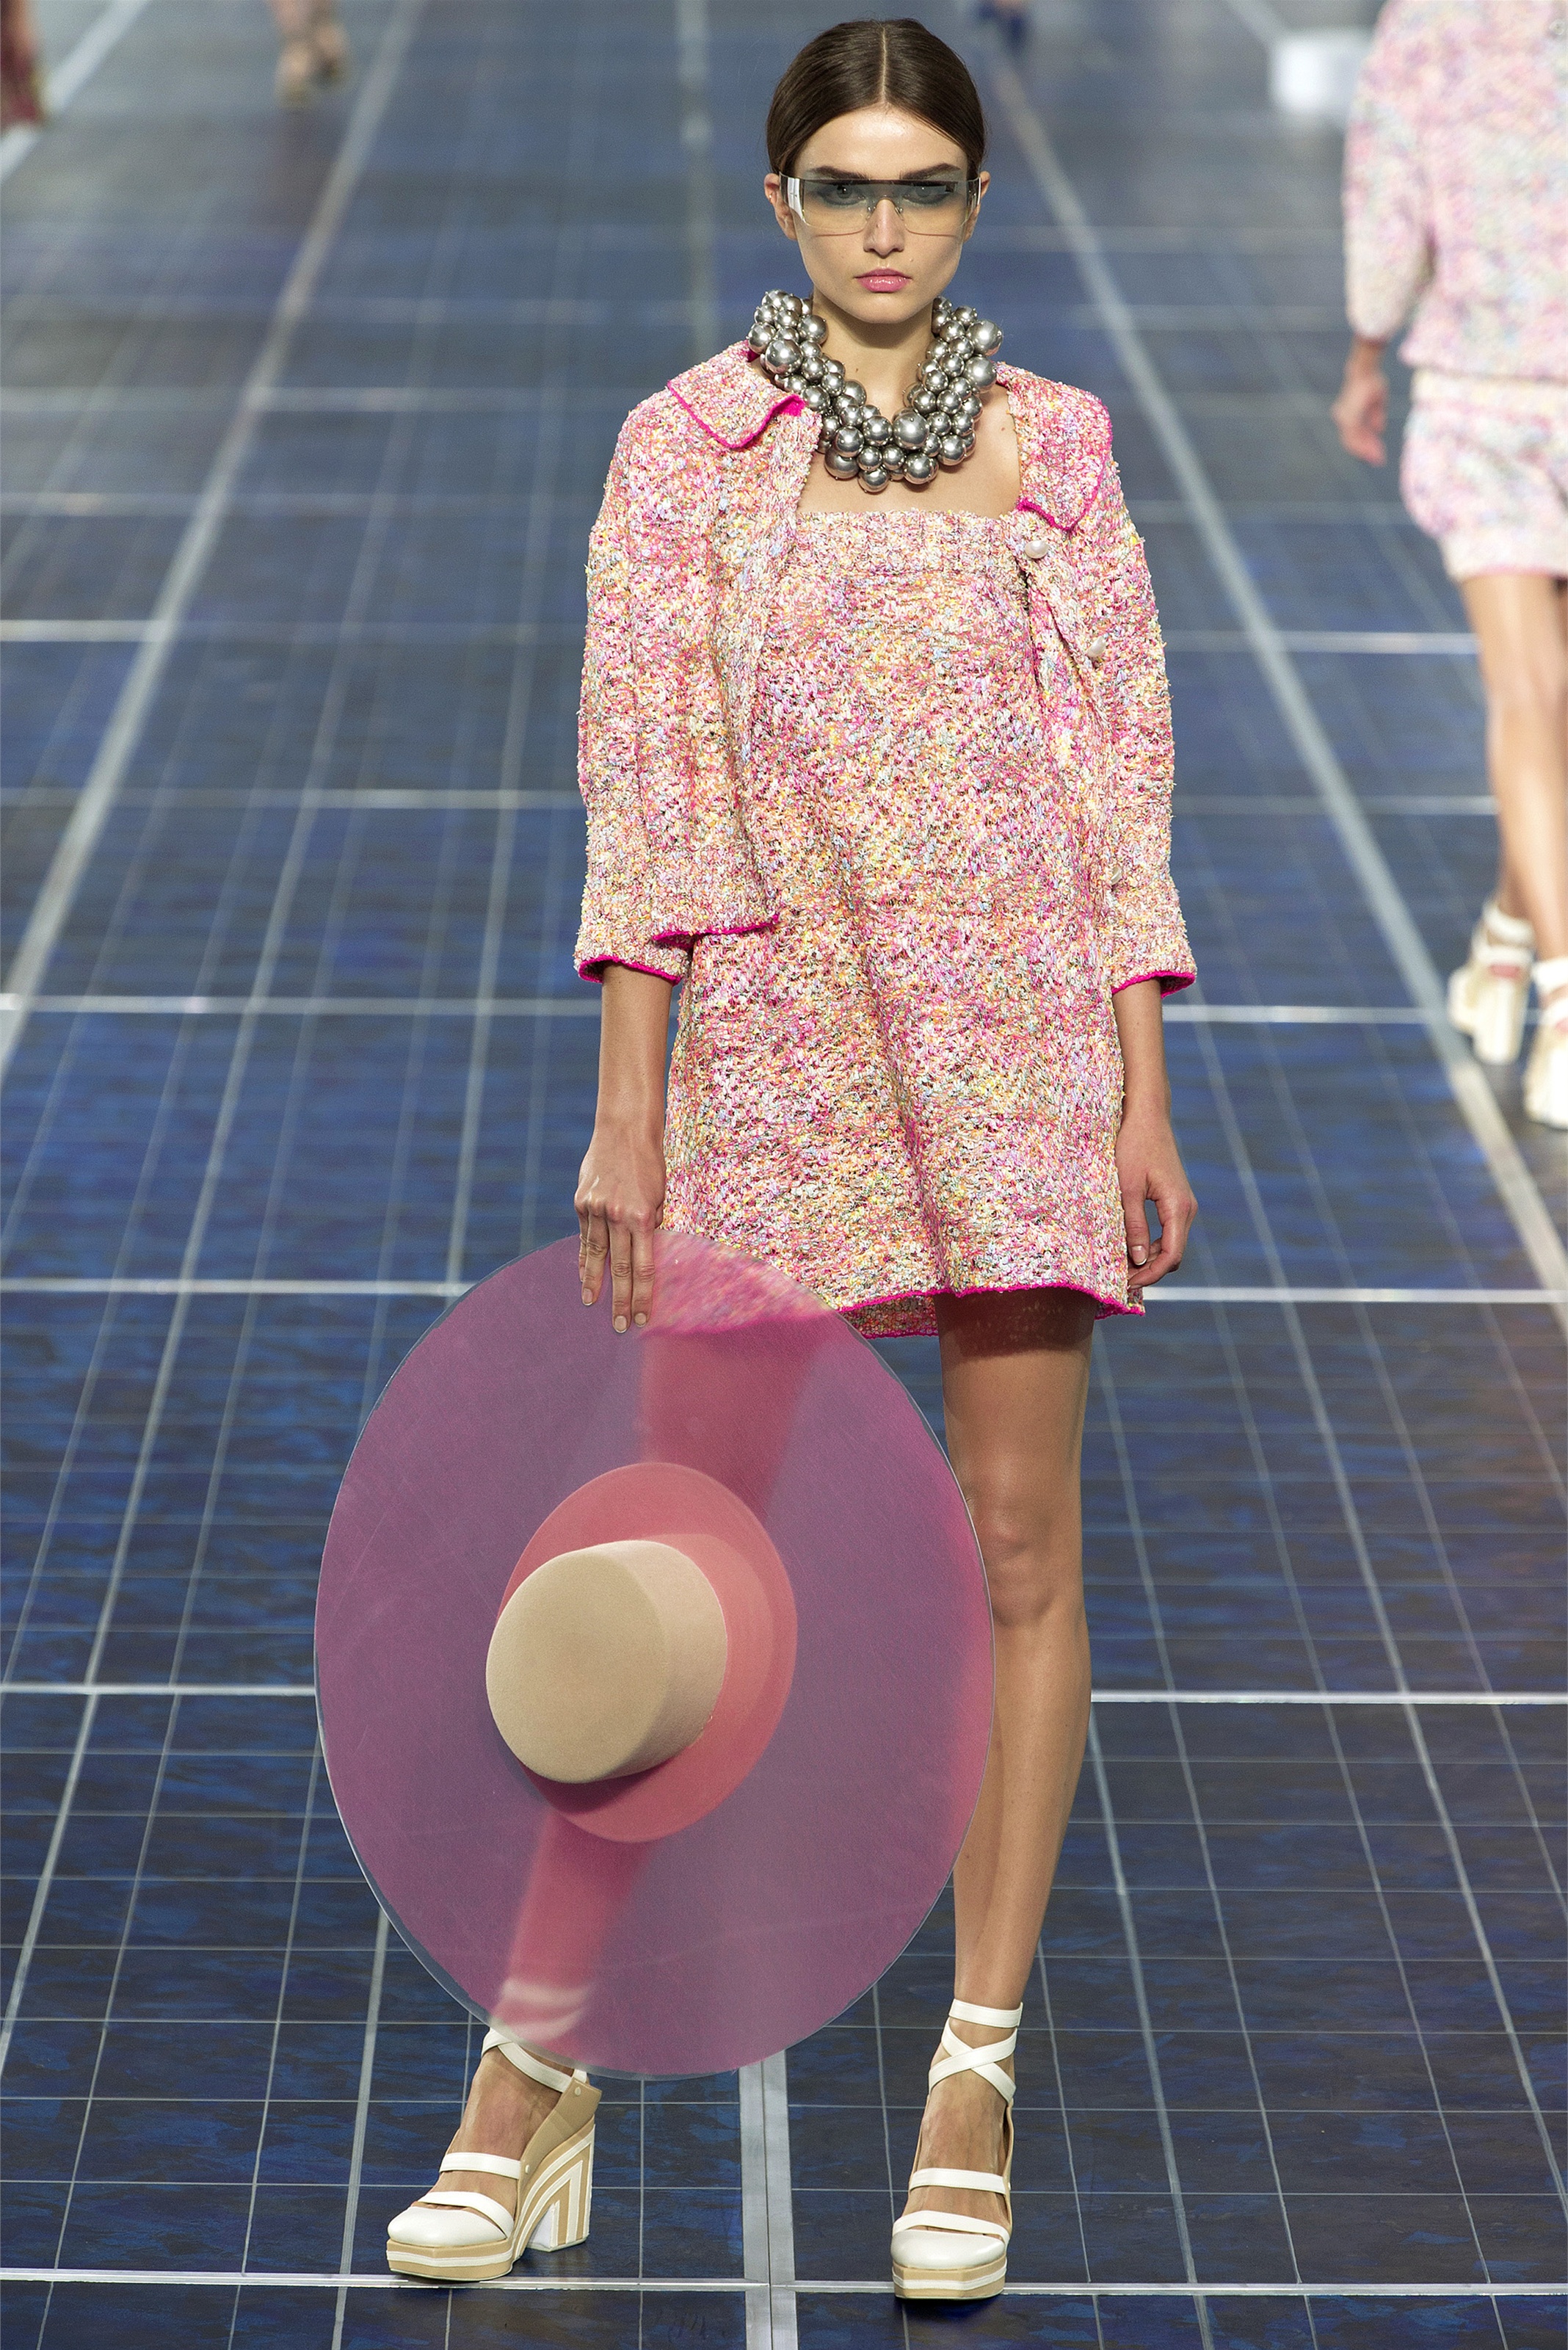 file/article/shlyapki/1351594297_skirt_dress_a_collection_of_ready_to_wear_from_chanel_spring_2013_55.jpg